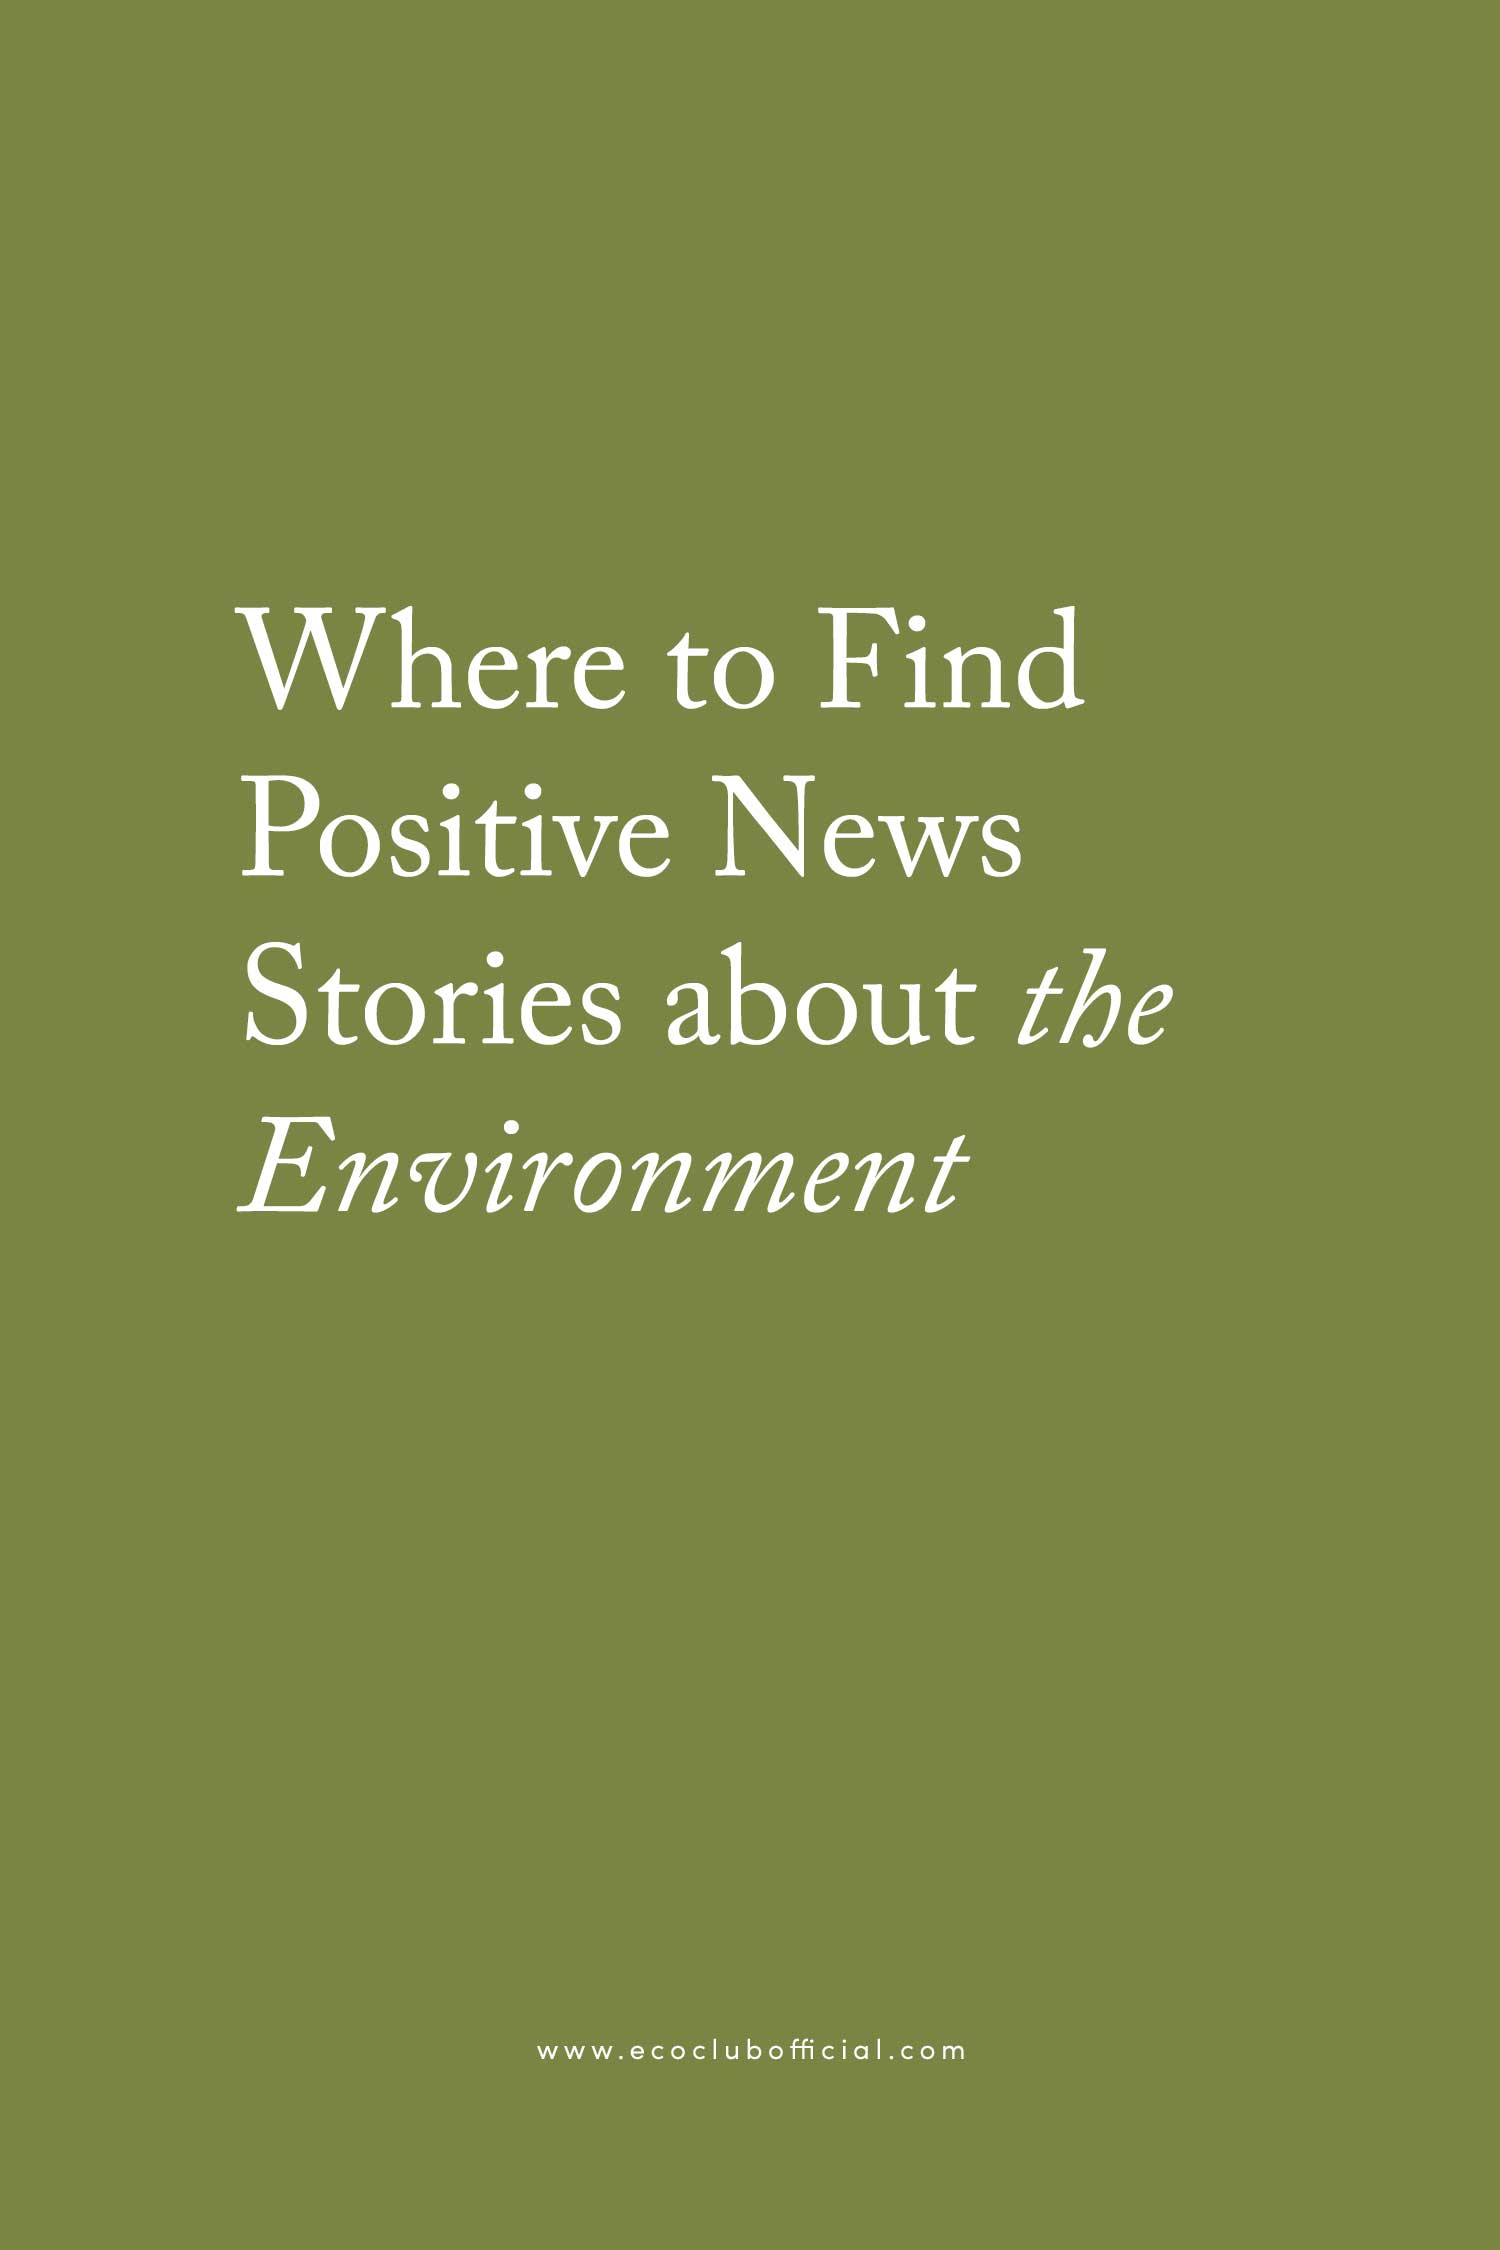 where to find positive news about the environment via eco club